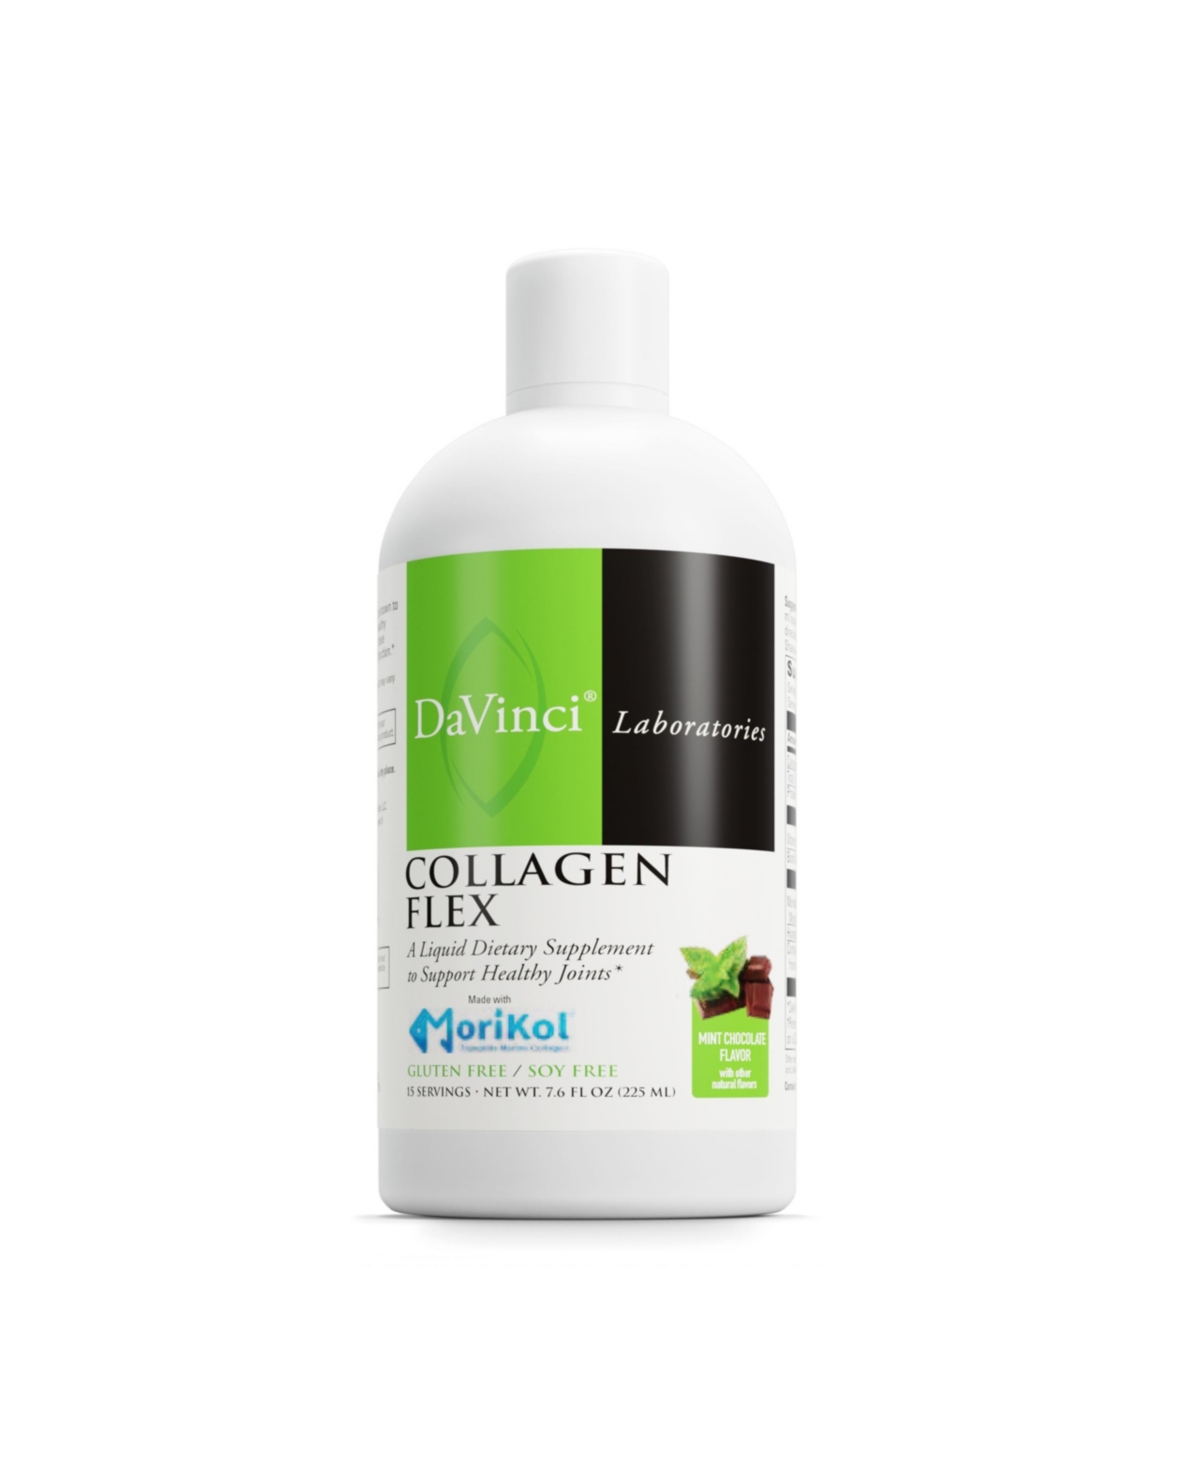 Davinci Labs - Collagen Flex - A Liquid Dietary Supplement to Support Healthy Joints - Mint Chocolate - Gluten Free, Soy Free